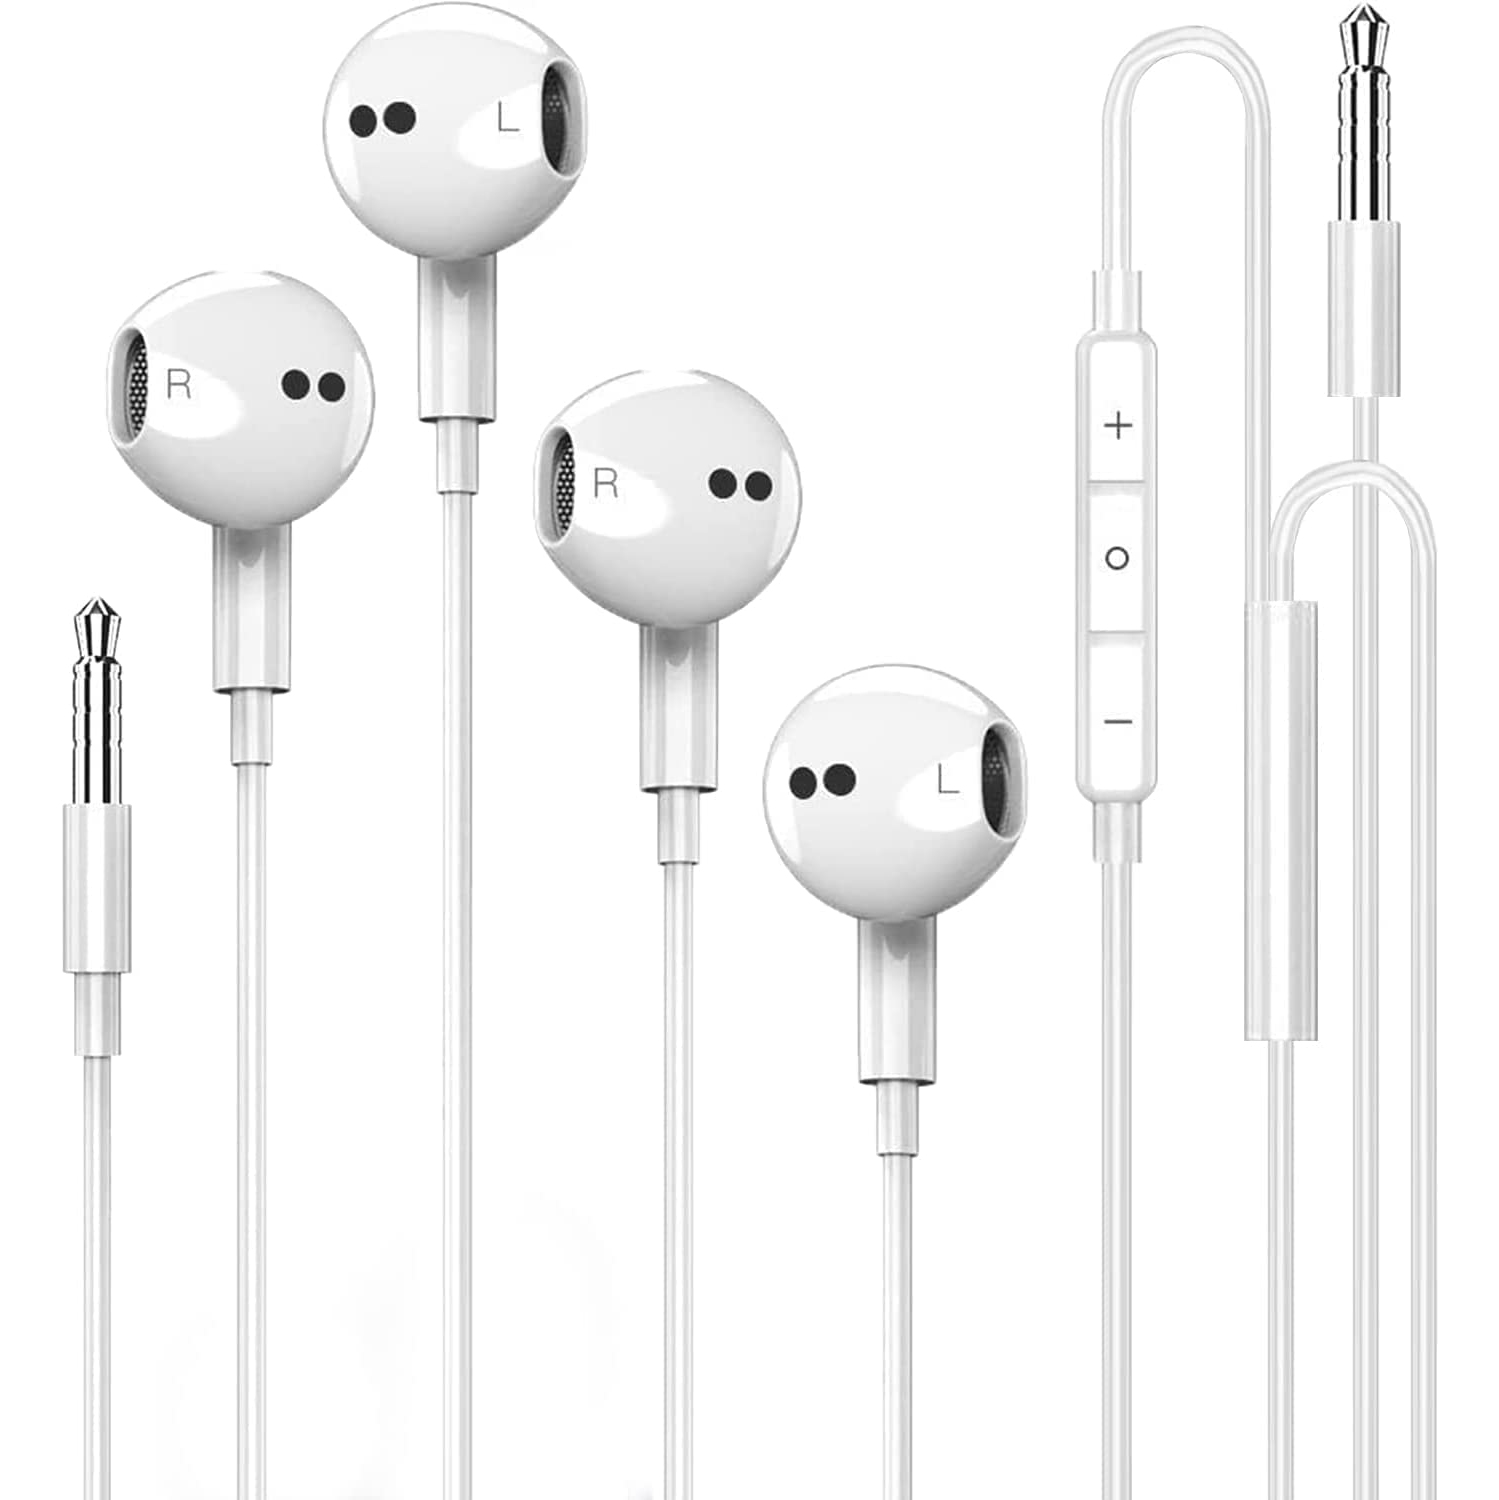 Dolaer 2 Pack Wired Headphones Earbuds with Microphone, 3.5mm Wired Earbuds Earphones, in-Ear Headphones with Mic Built-in Volume Control Compatible with iPhone 6, 6S, Android, iPa